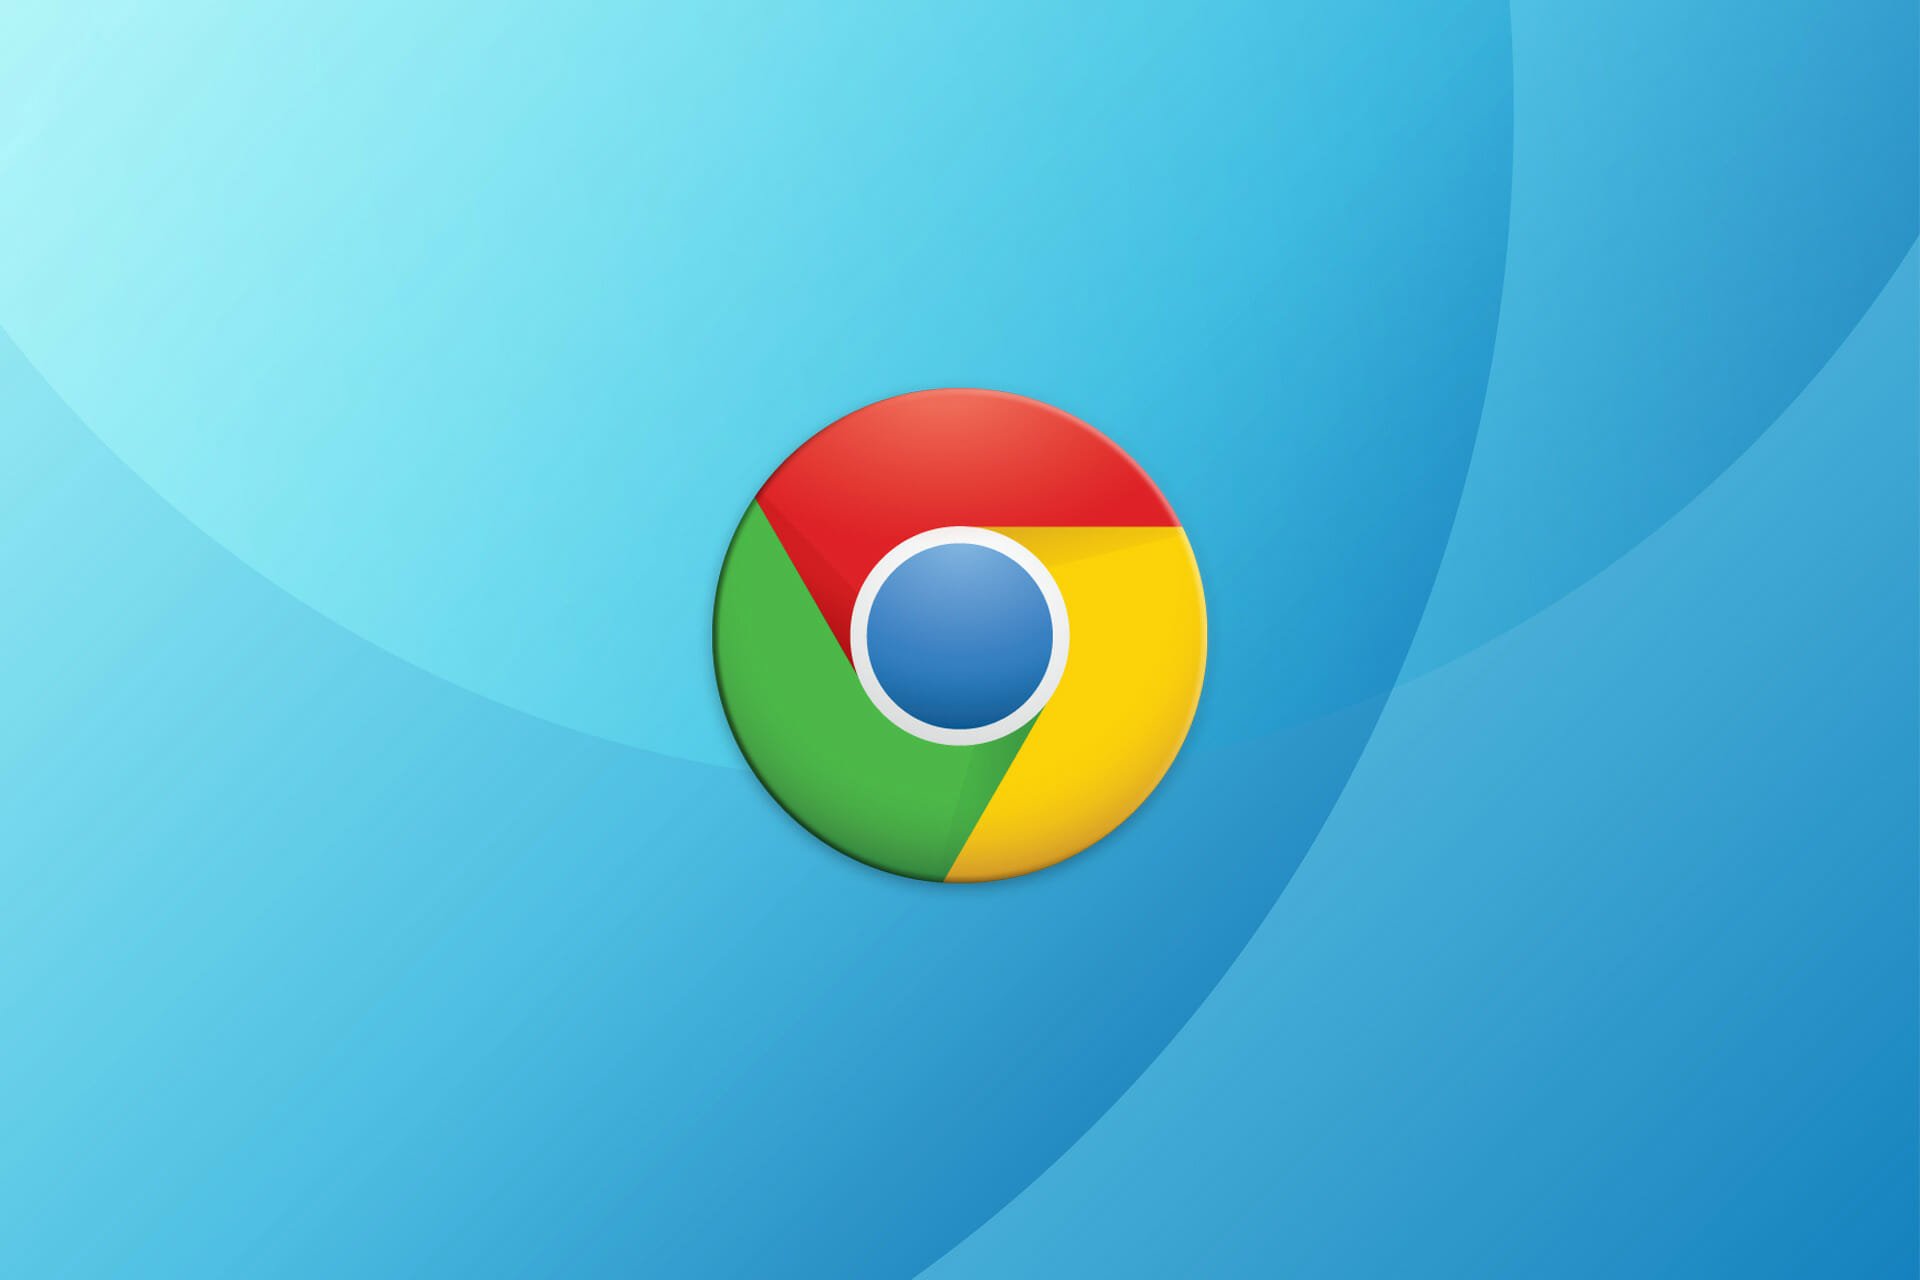 Chrome replaces Flash with HTML5 content